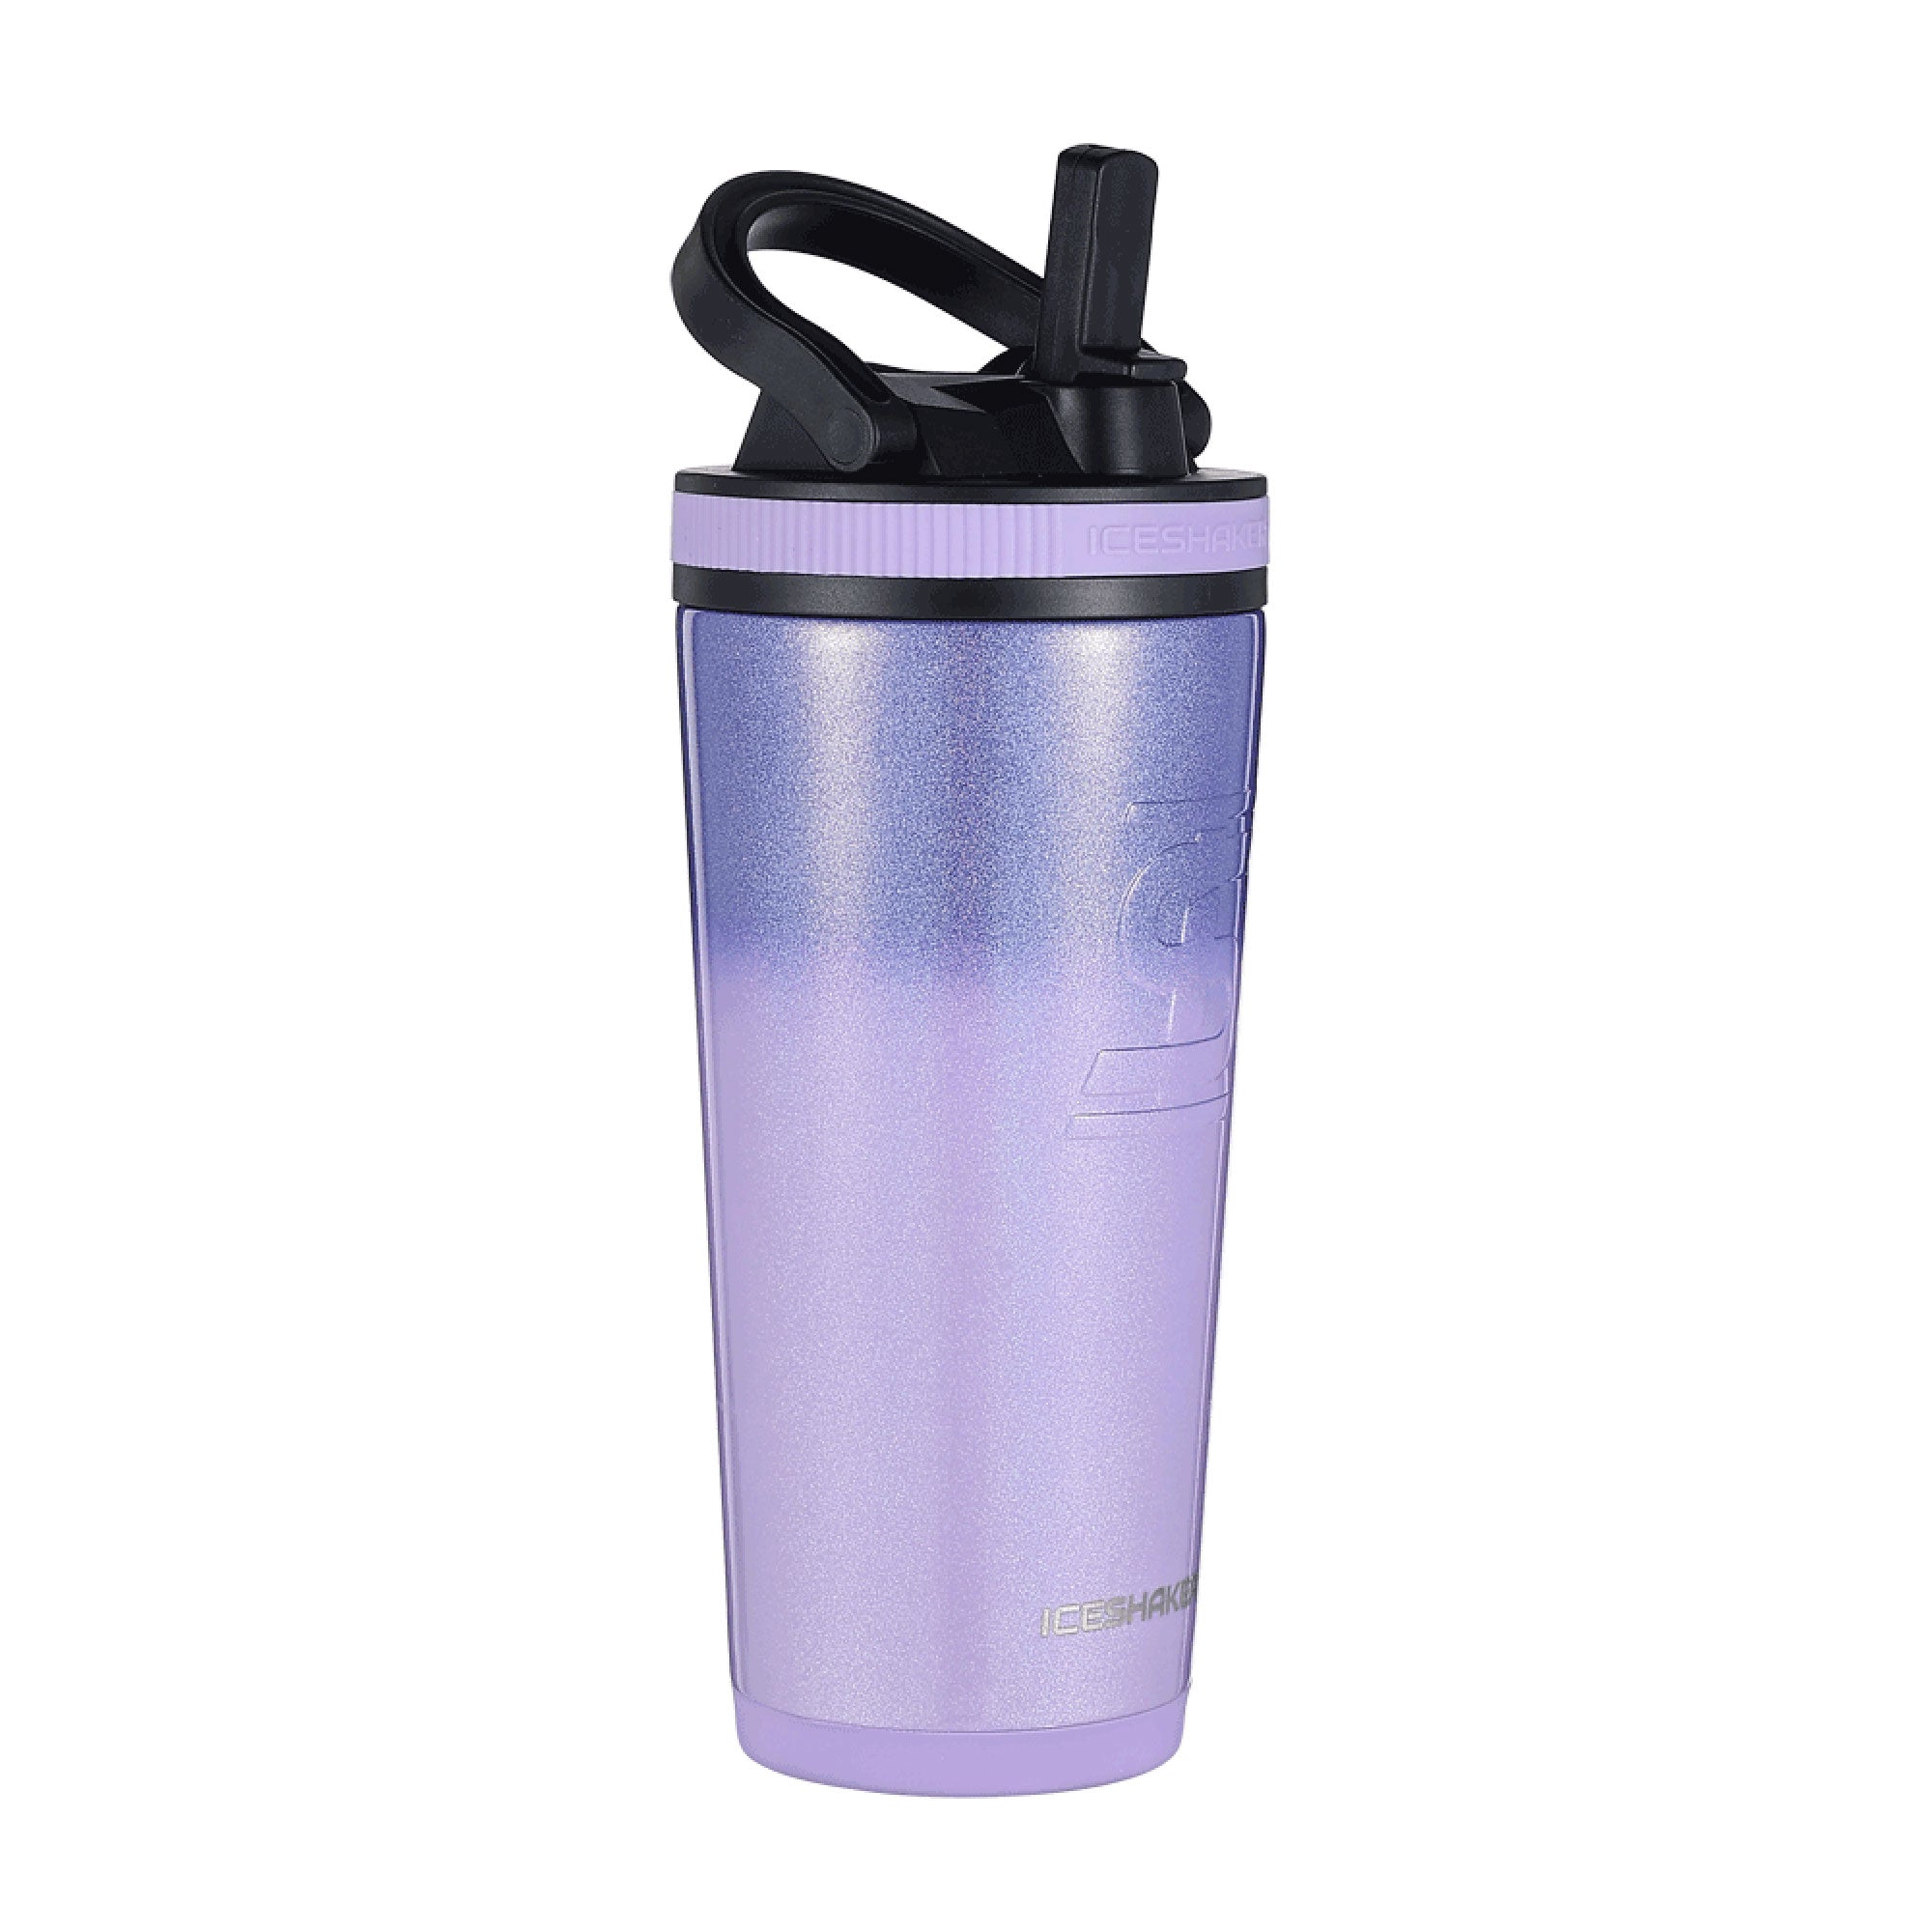 Bouteille isotherme 1,2L - Sport noire mate poudrée. SHAKER BALL OFFER –  Sportives